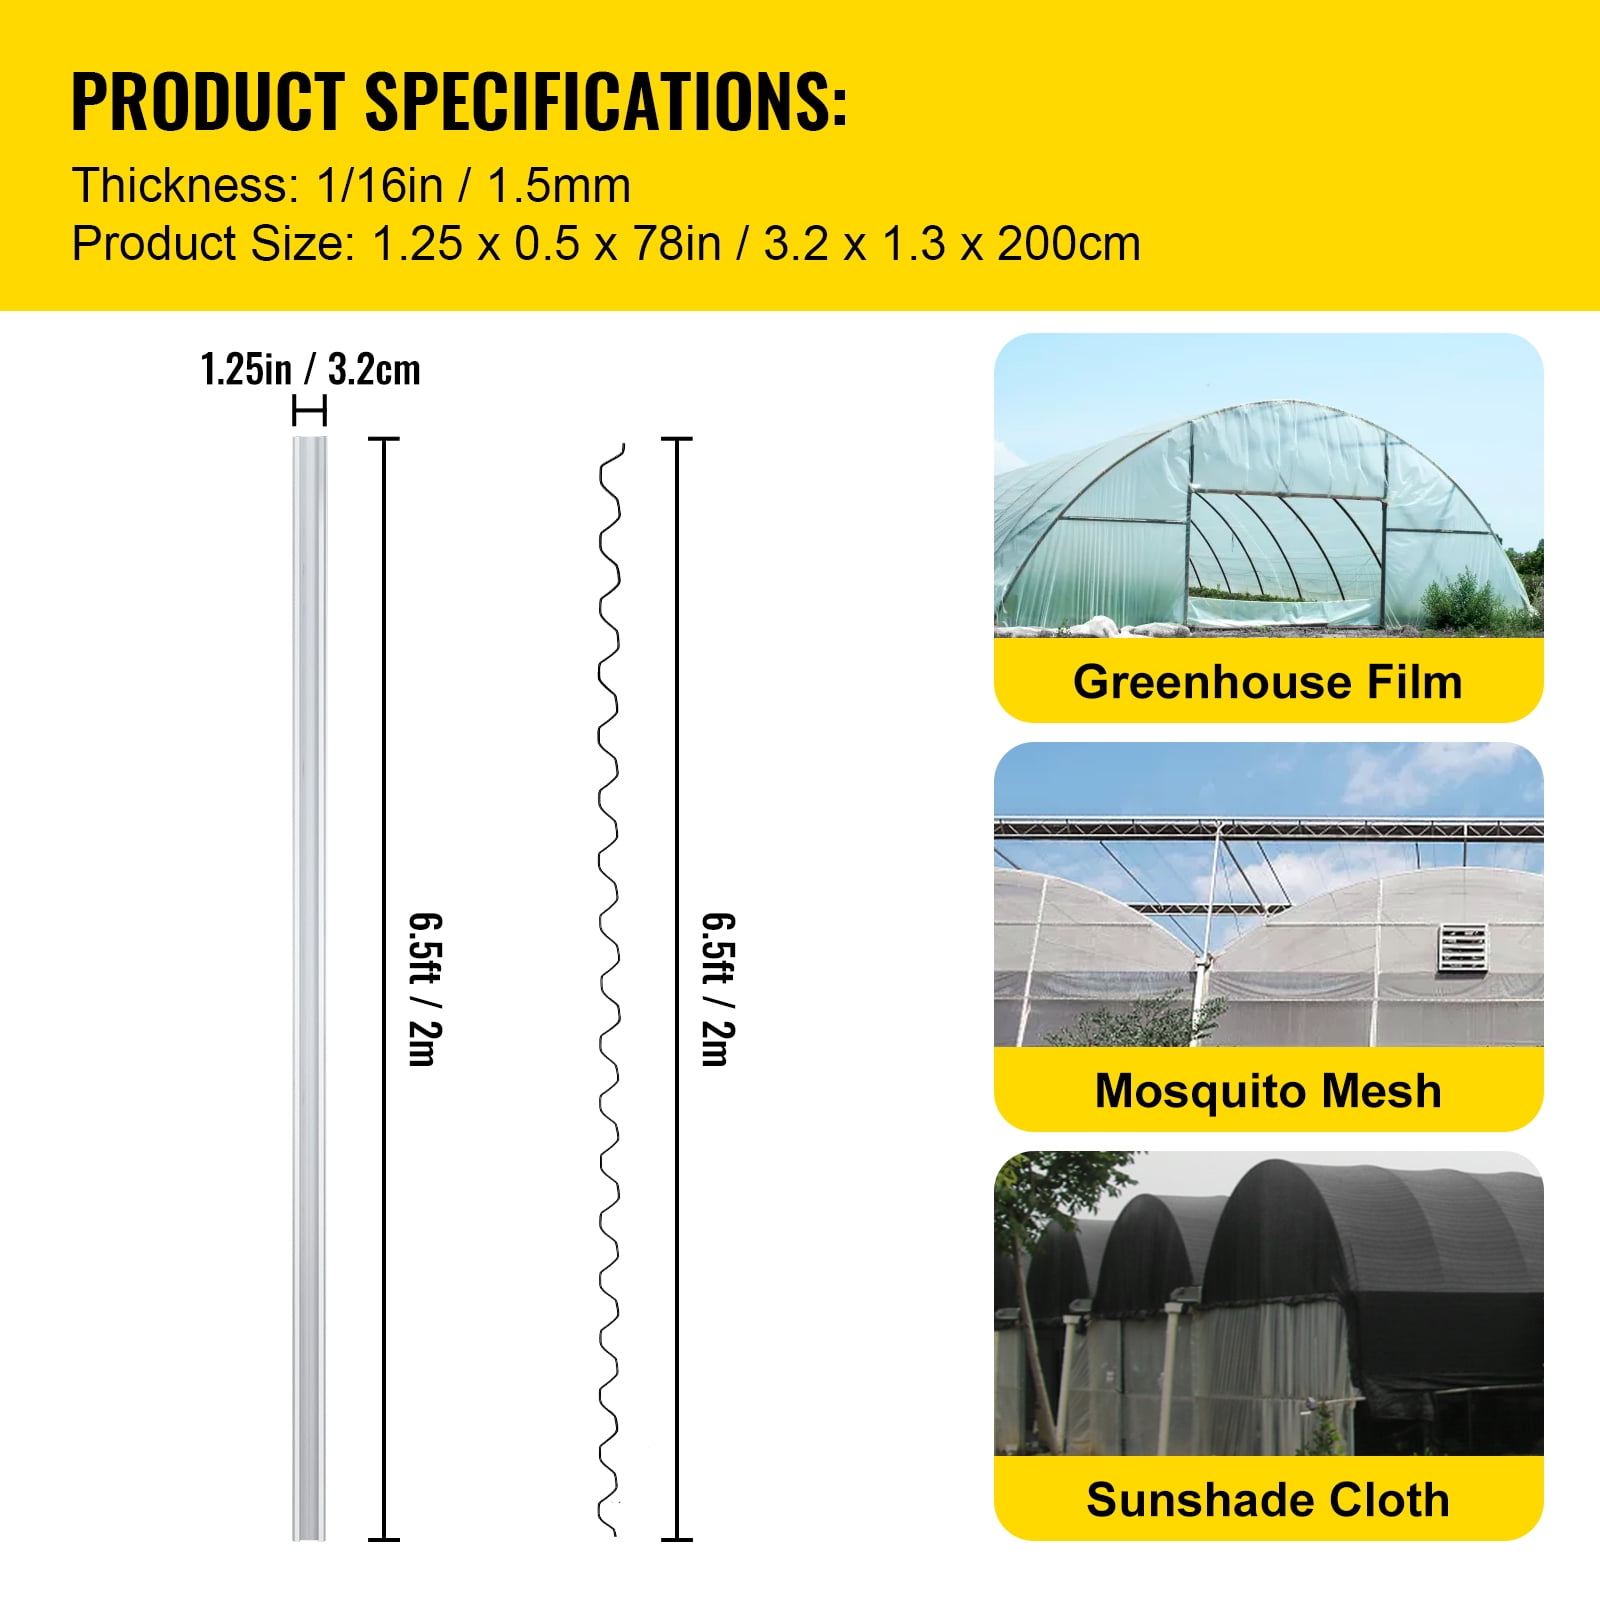 Jiggly Greenhouse Wire and Channel Kit | 1 x 6.5' Aluminum Greenhouse Channel with 6.5' Steel Wire Jiggly Wire | PVC Coated Wire and U-Channel 